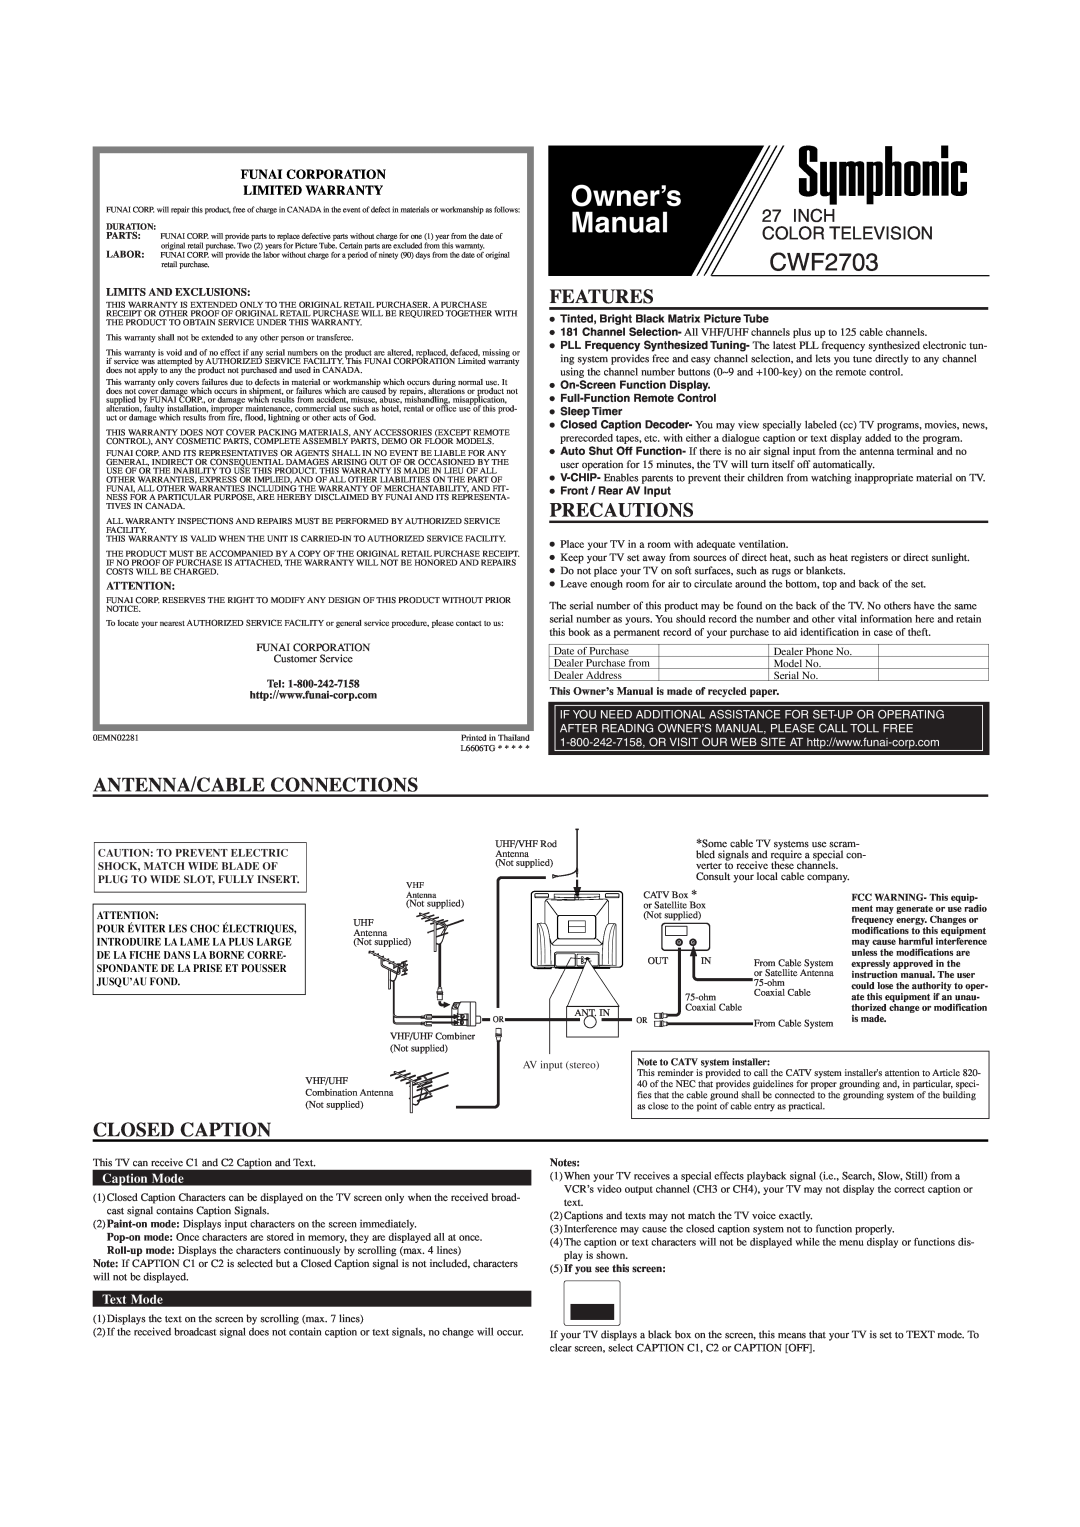 Symphonic CWF2703 owner manual Features, Precautions, Antenna/Cable Connections, Closed Caption, Caption Mode, Text Mode 